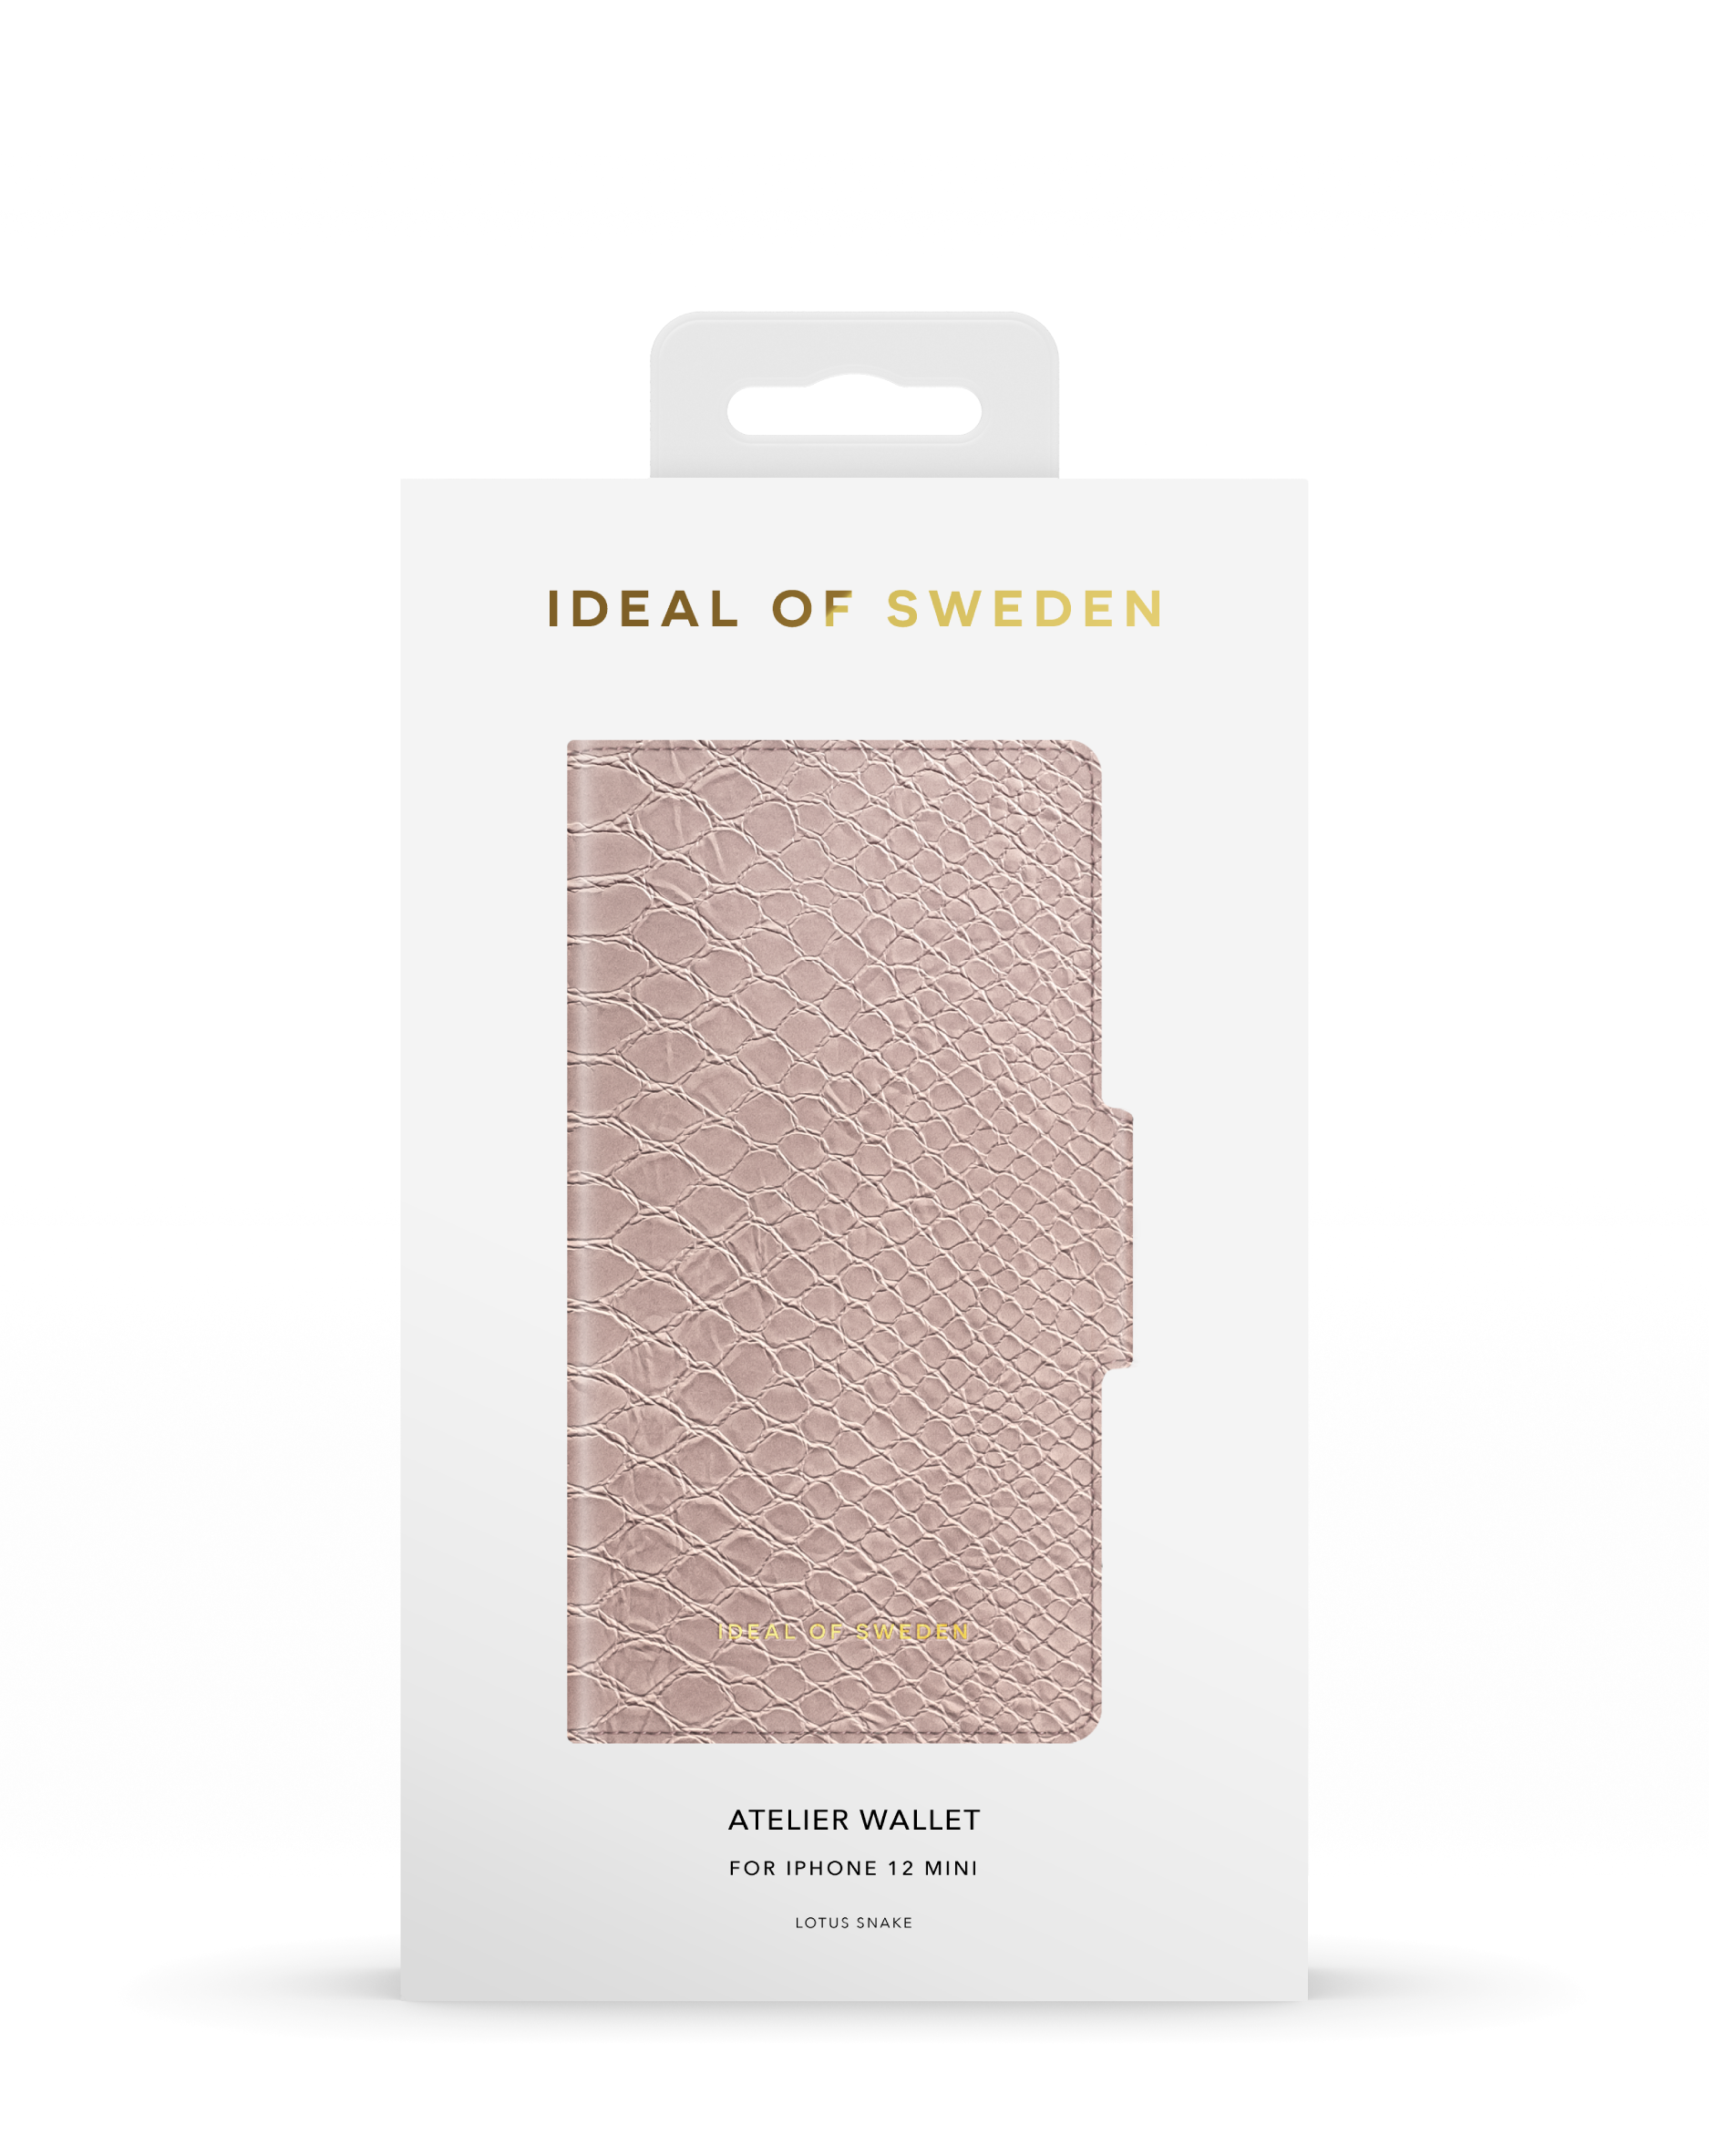 IDEAL OF Apple, 12 Snake SWEDEN mini, Lotus IPhone Bookcover, IDAW-I2054-234